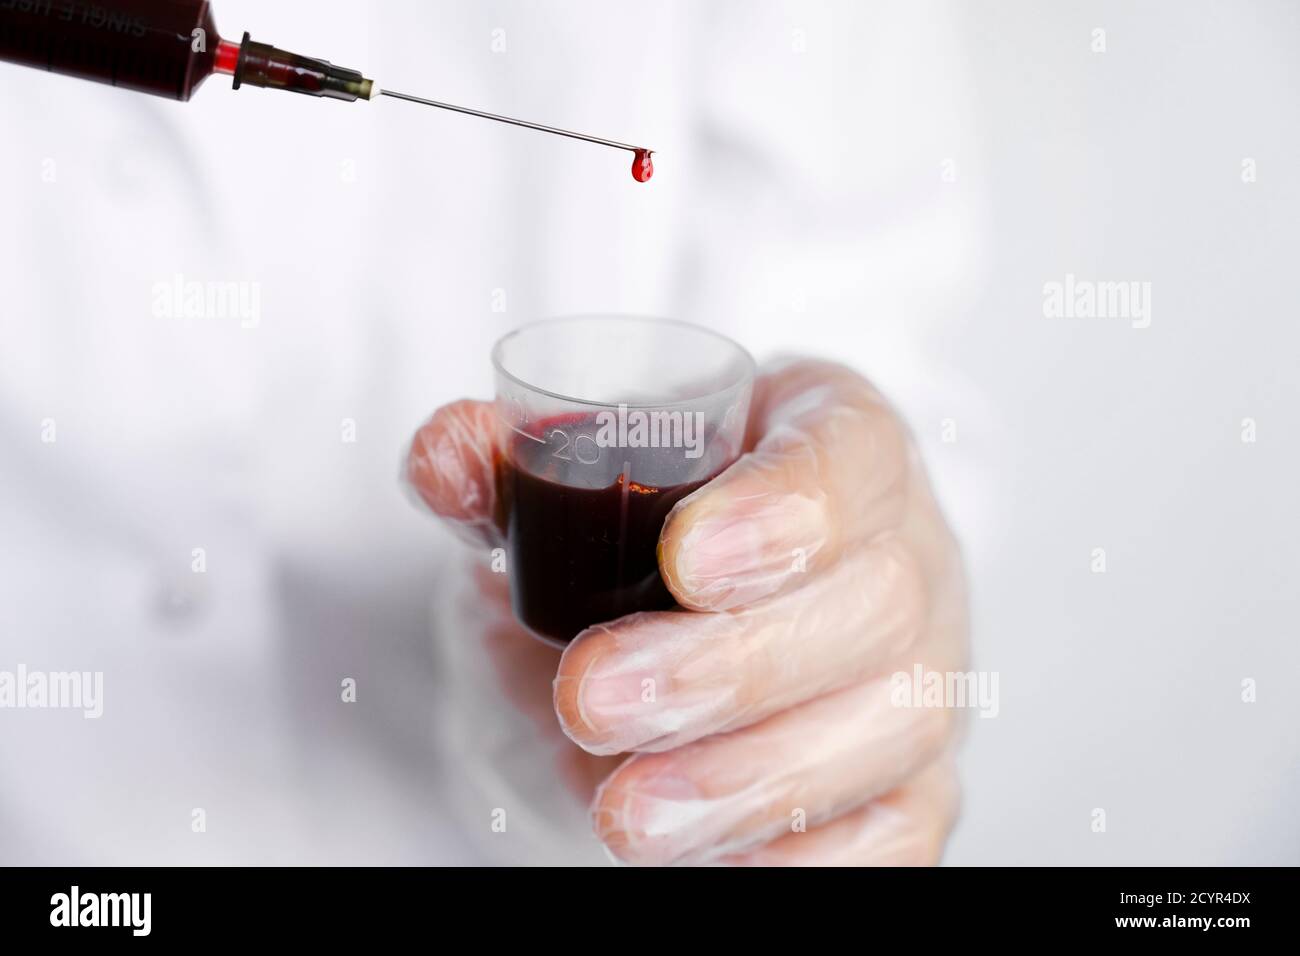 Doctor or lab scientist in personal protective equipment holding a syringe full of blood, with focus on single drop dripping out of the needle tip Stock Photo